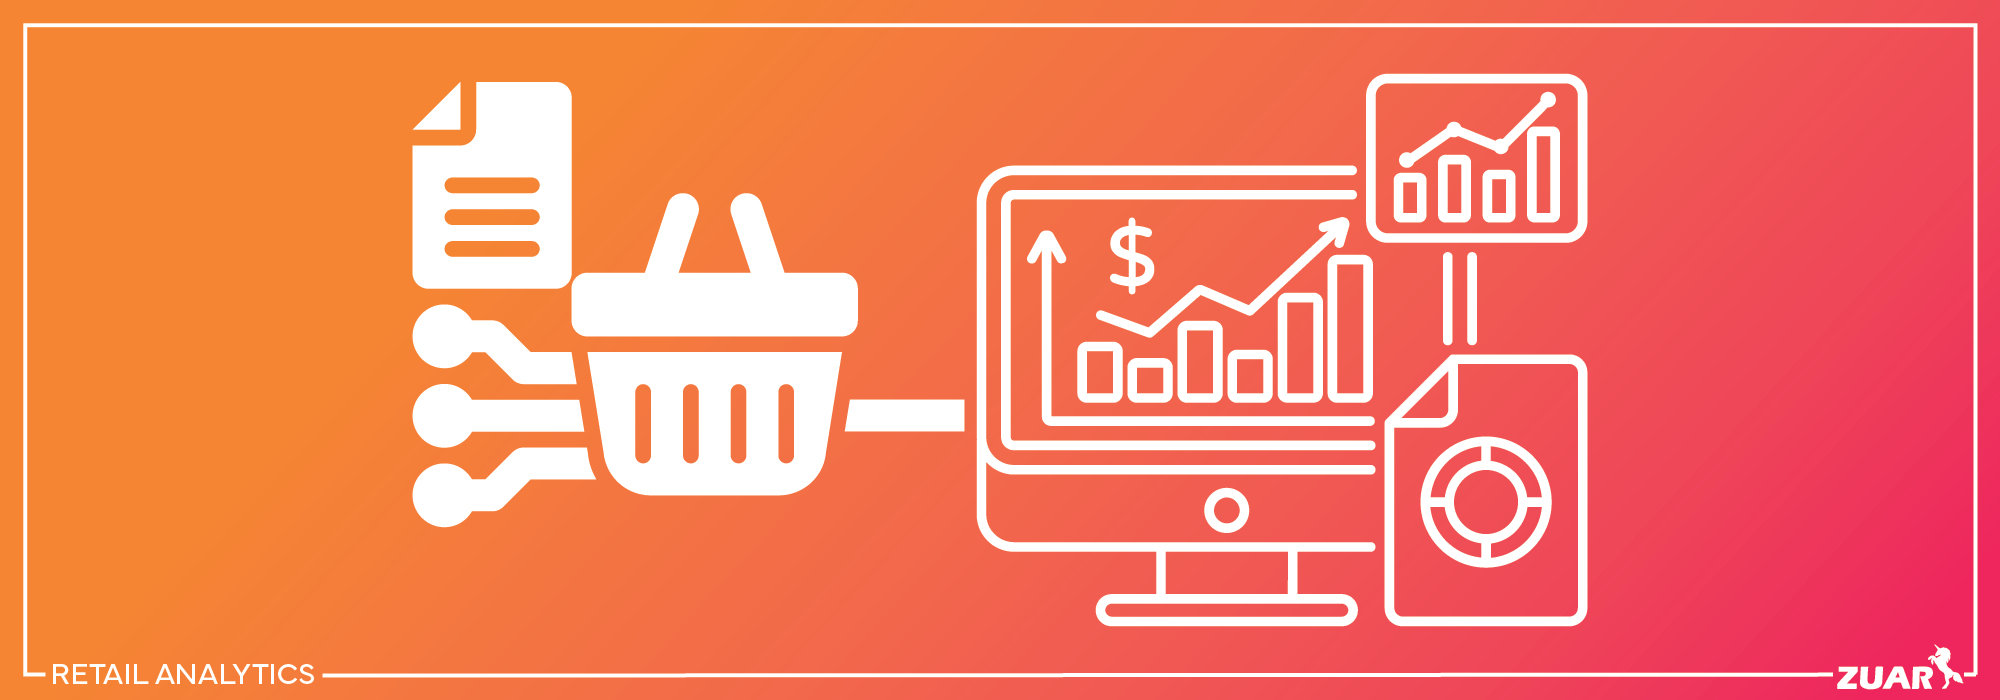 What Is Retail Analytics and Why Is It Important?